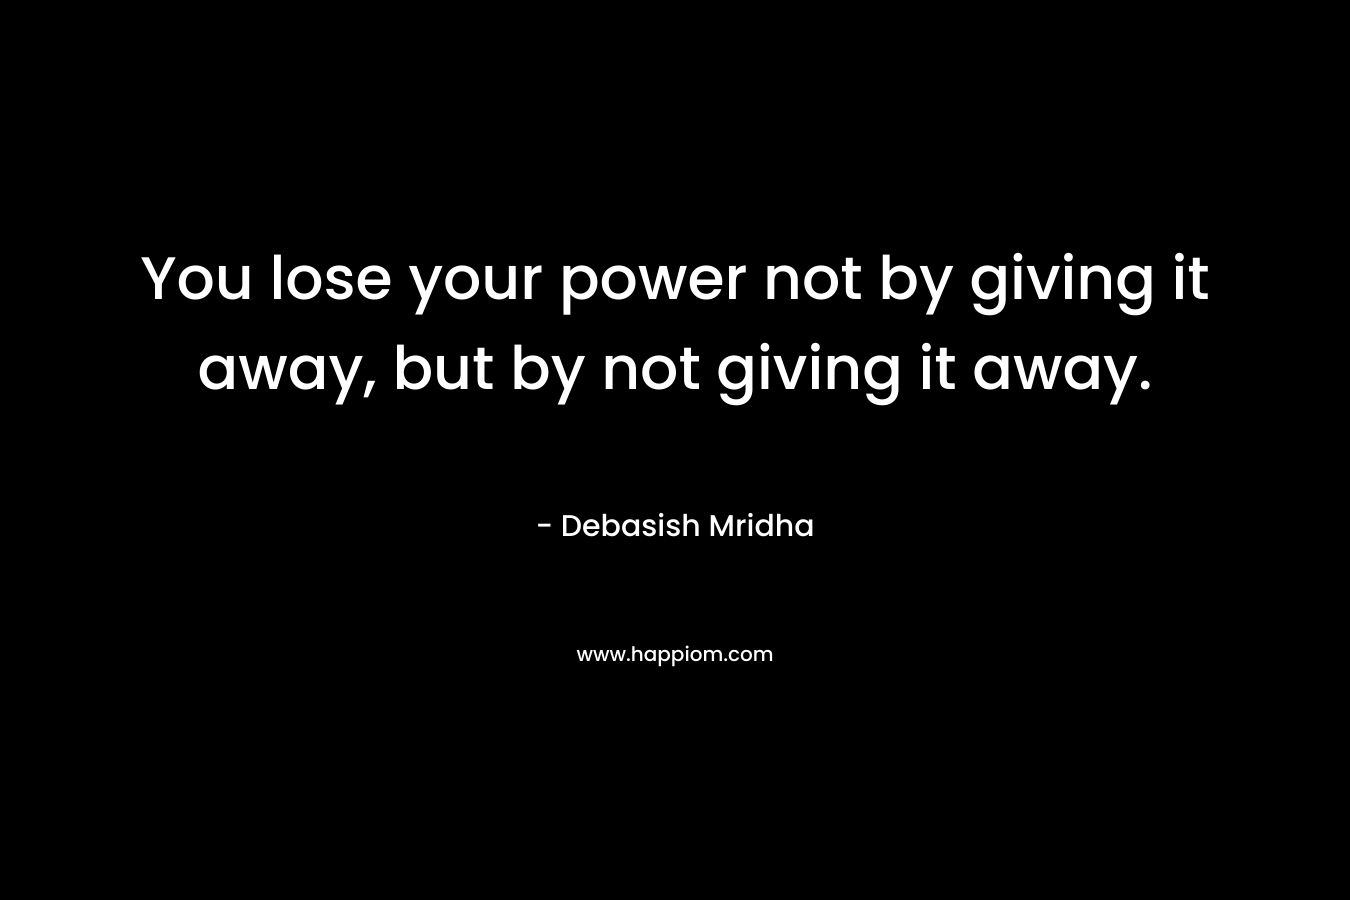 You lose your power not by giving it away, but by not giving it away.